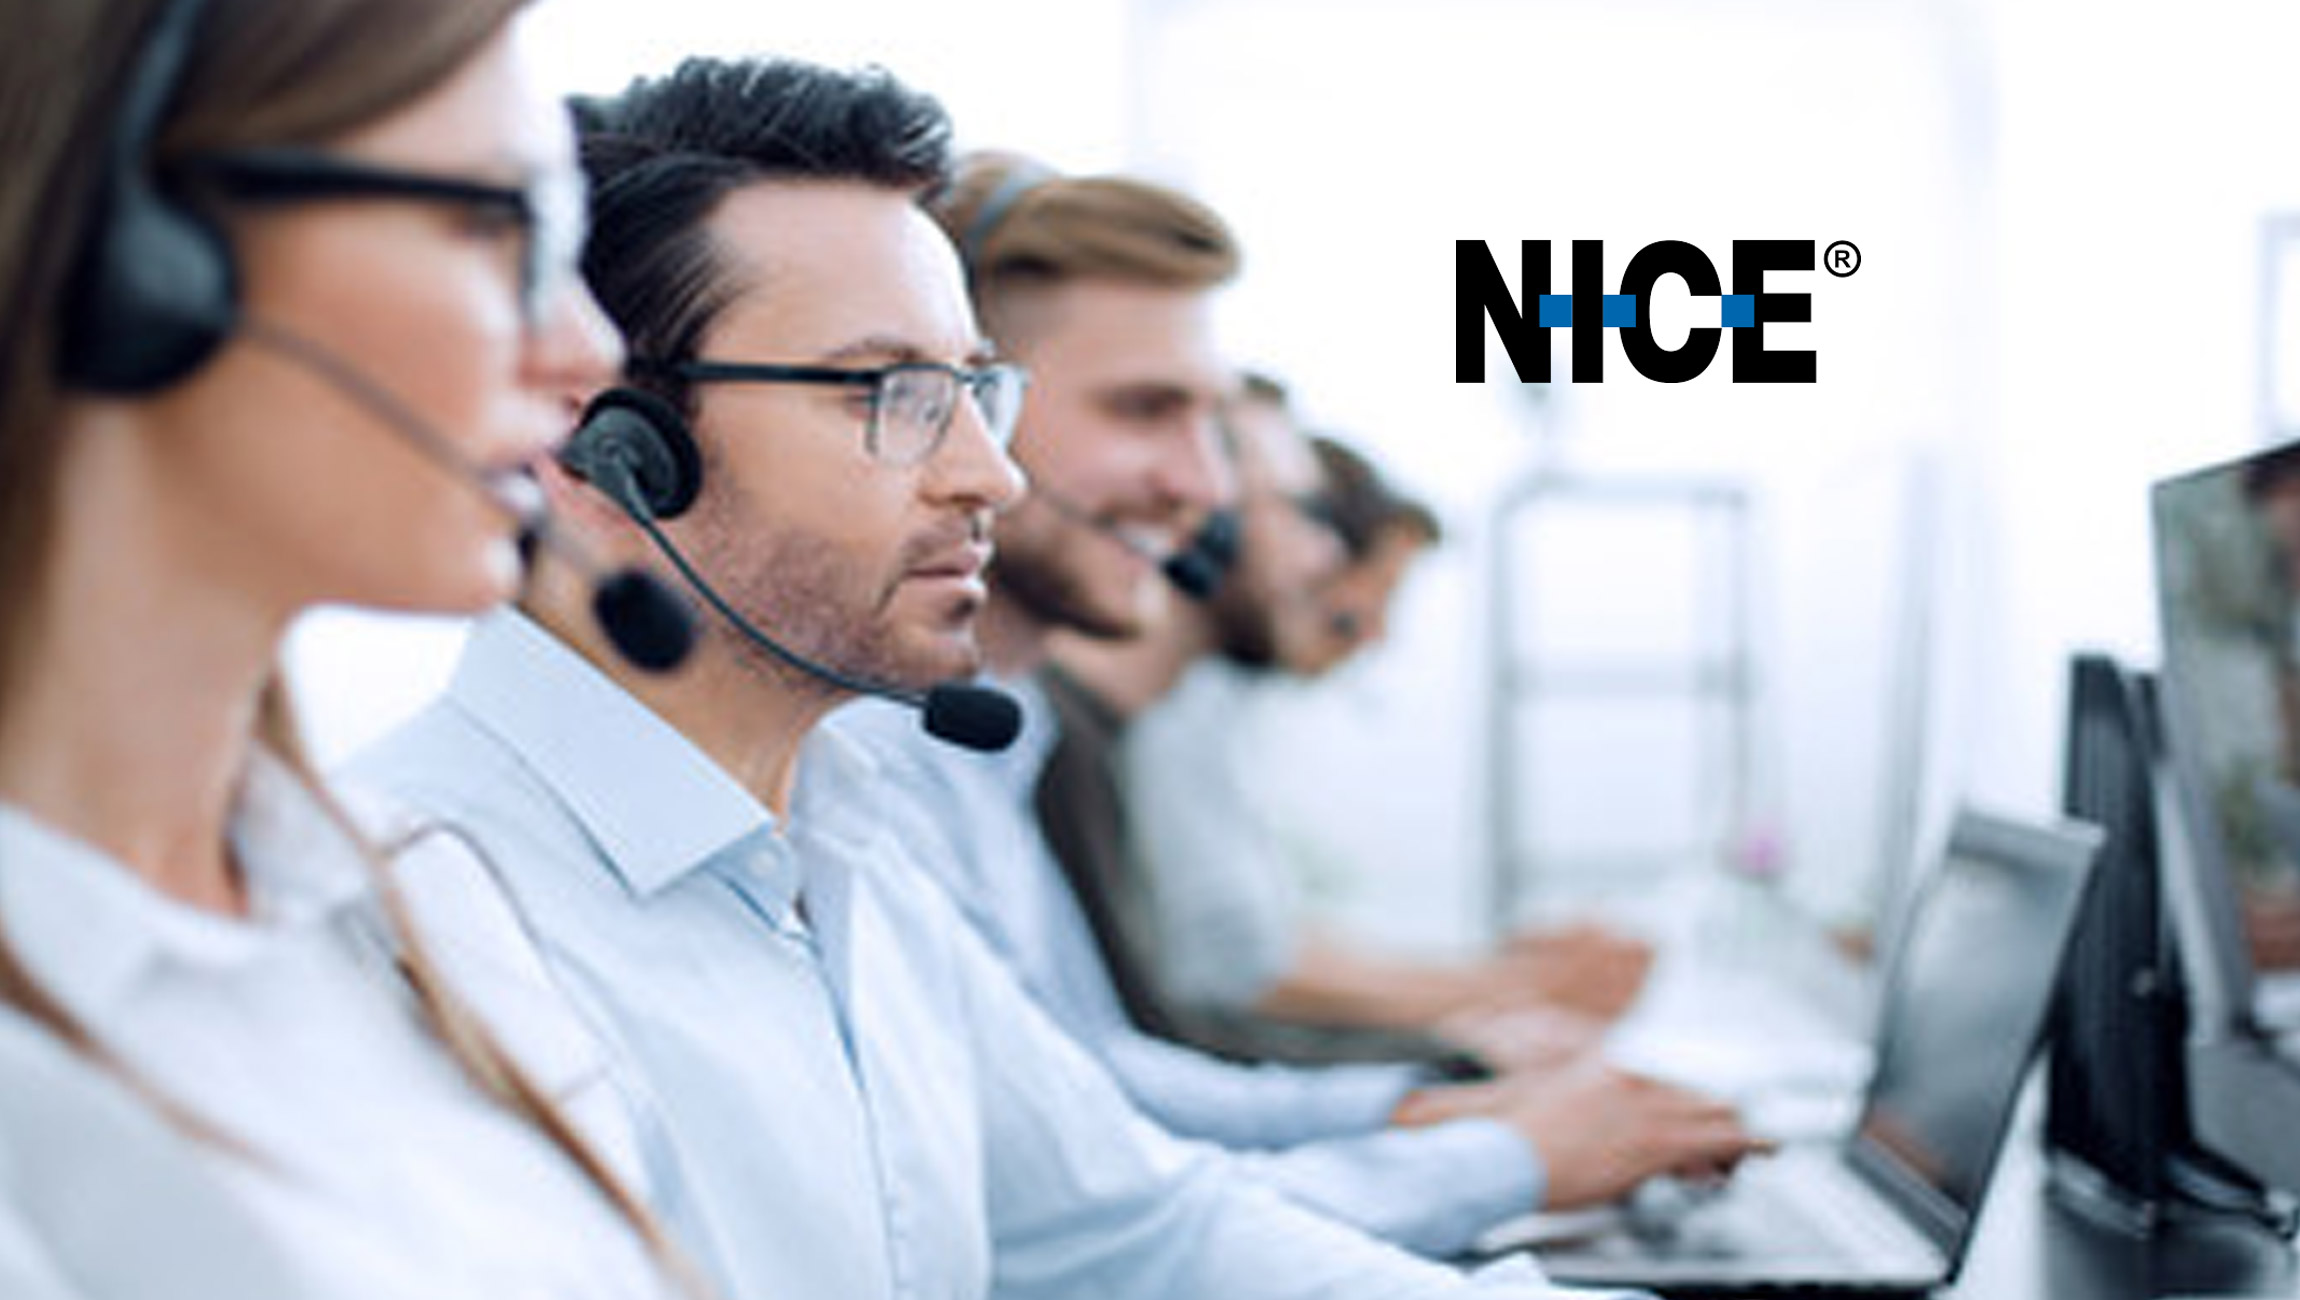 Nice Applauded By Frost & Sullivan For Optimizing Contact Center Efficiency, Reliability, And Flexibility With Its Comprehensive Workforce Management Suite